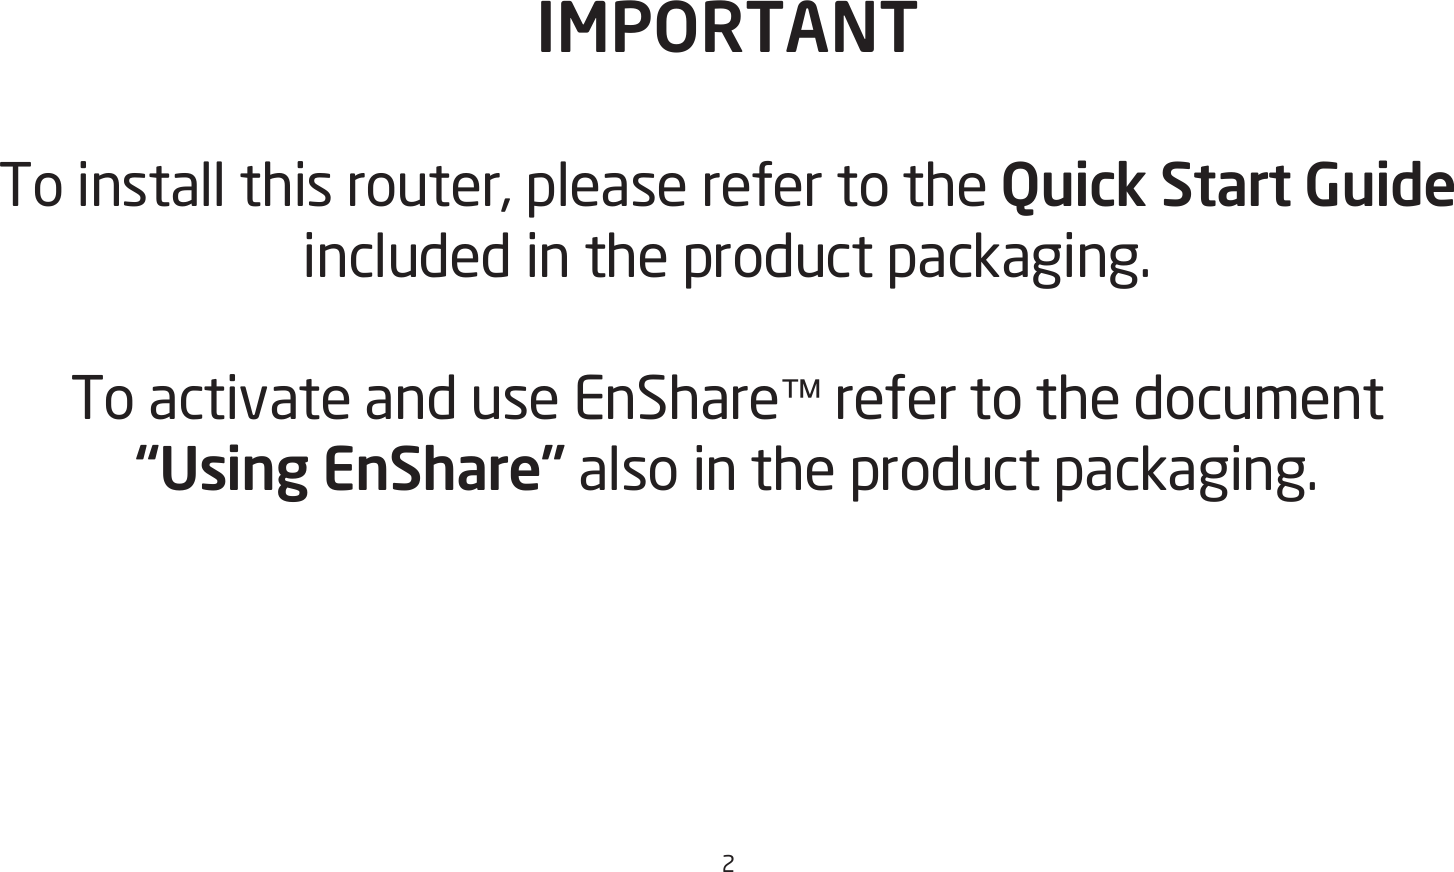 2IMPORTANTTo install this router, please refer to the Quick Start Guide included in the product packaging.To activate and use EnShare™ refer to the document “Using EnShare” also in the product packaging.